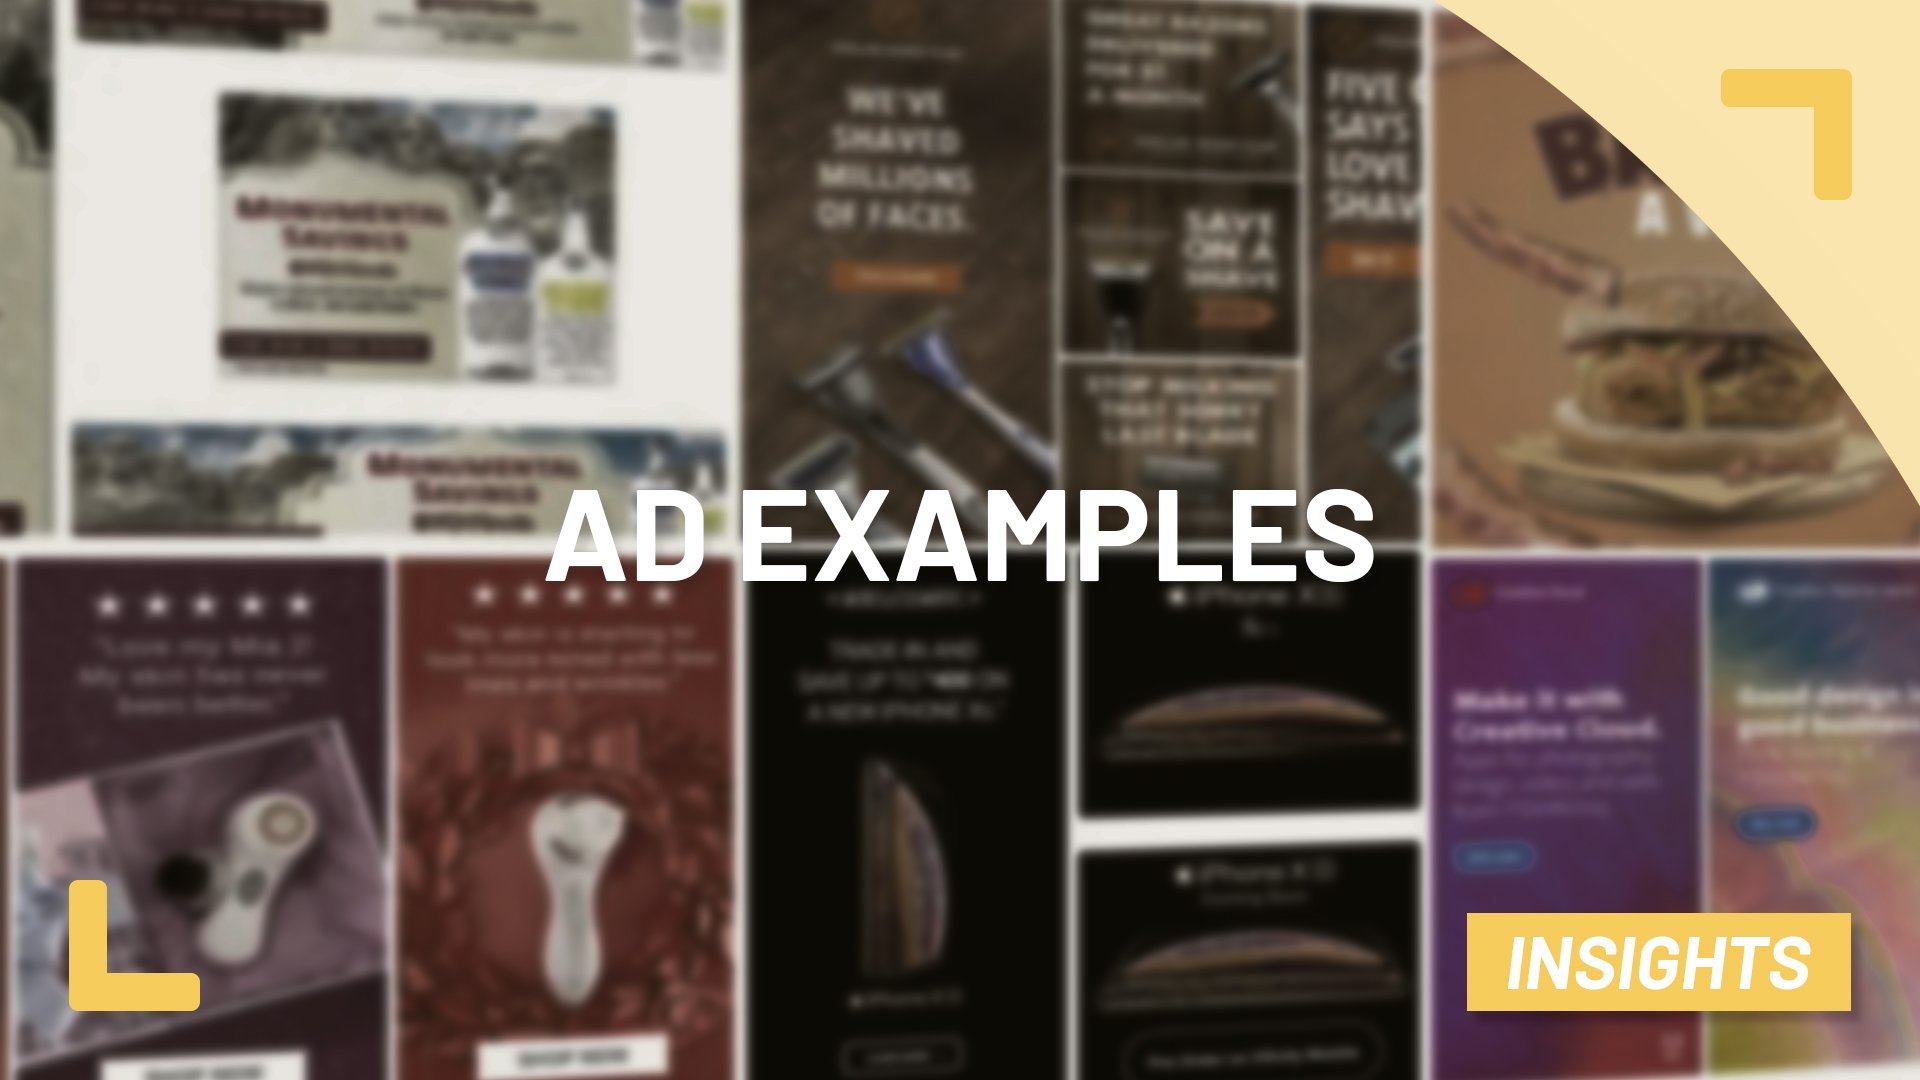 Examples of digital advertisement ideas that rock